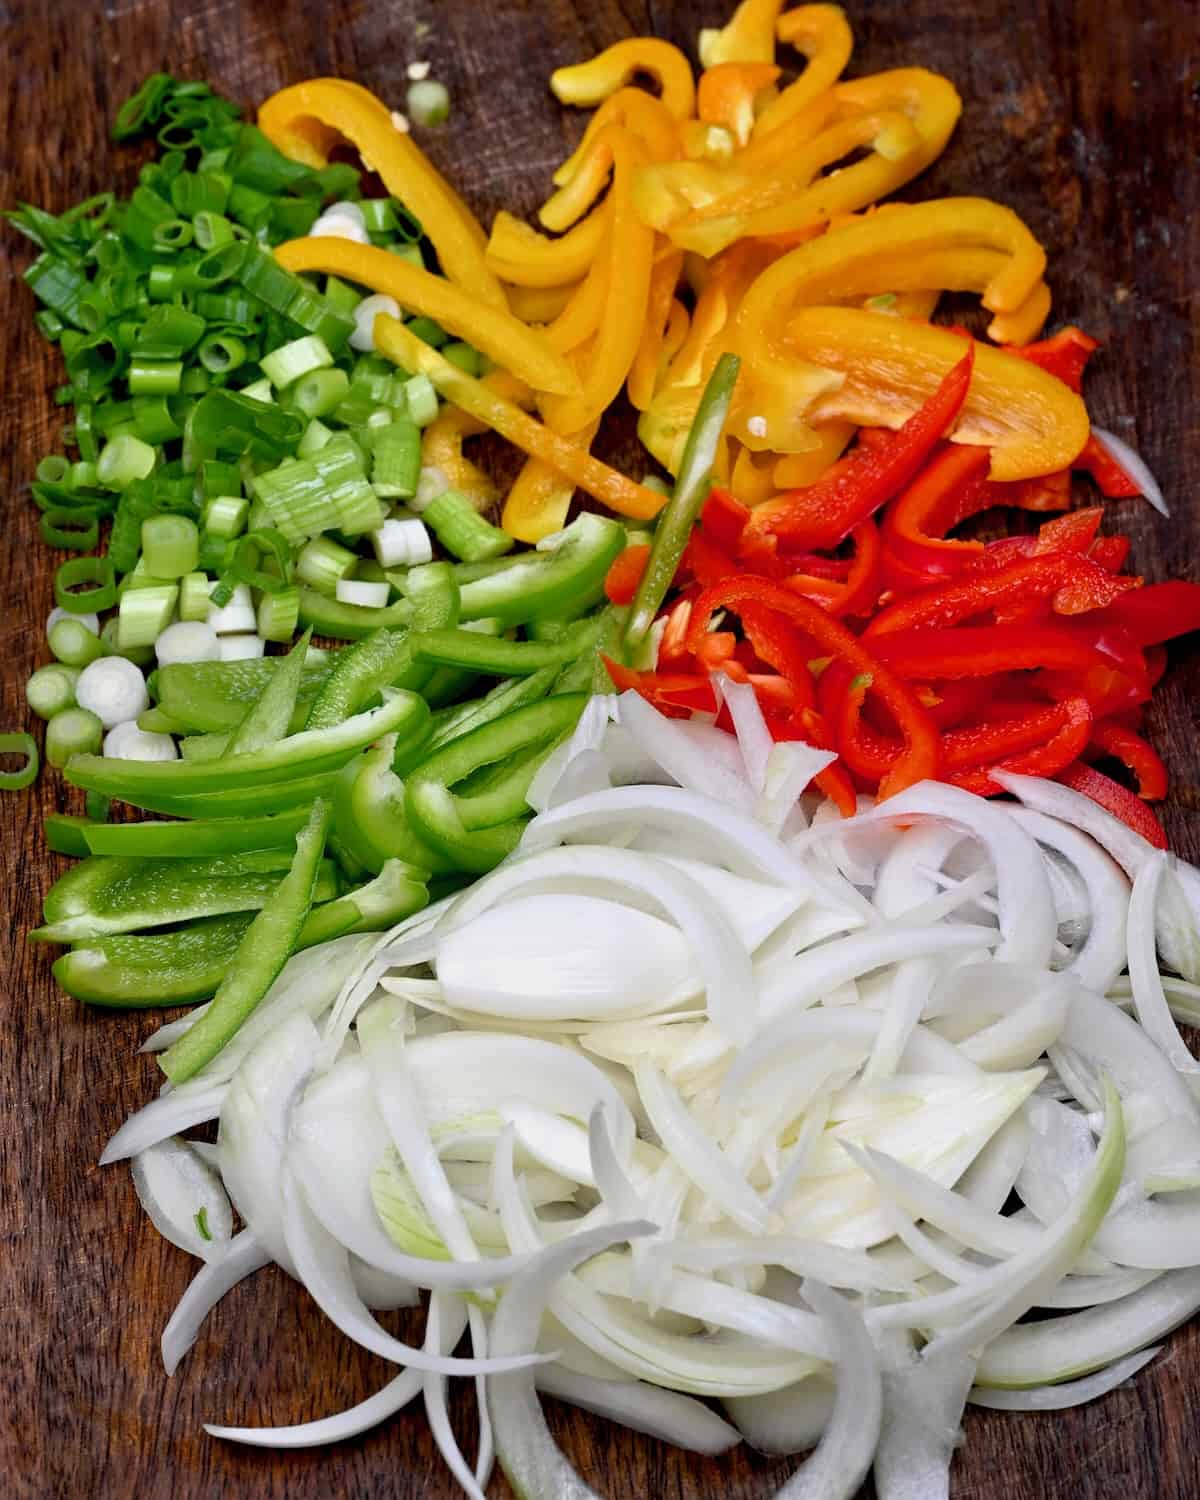 Sliced onion and bell peppers